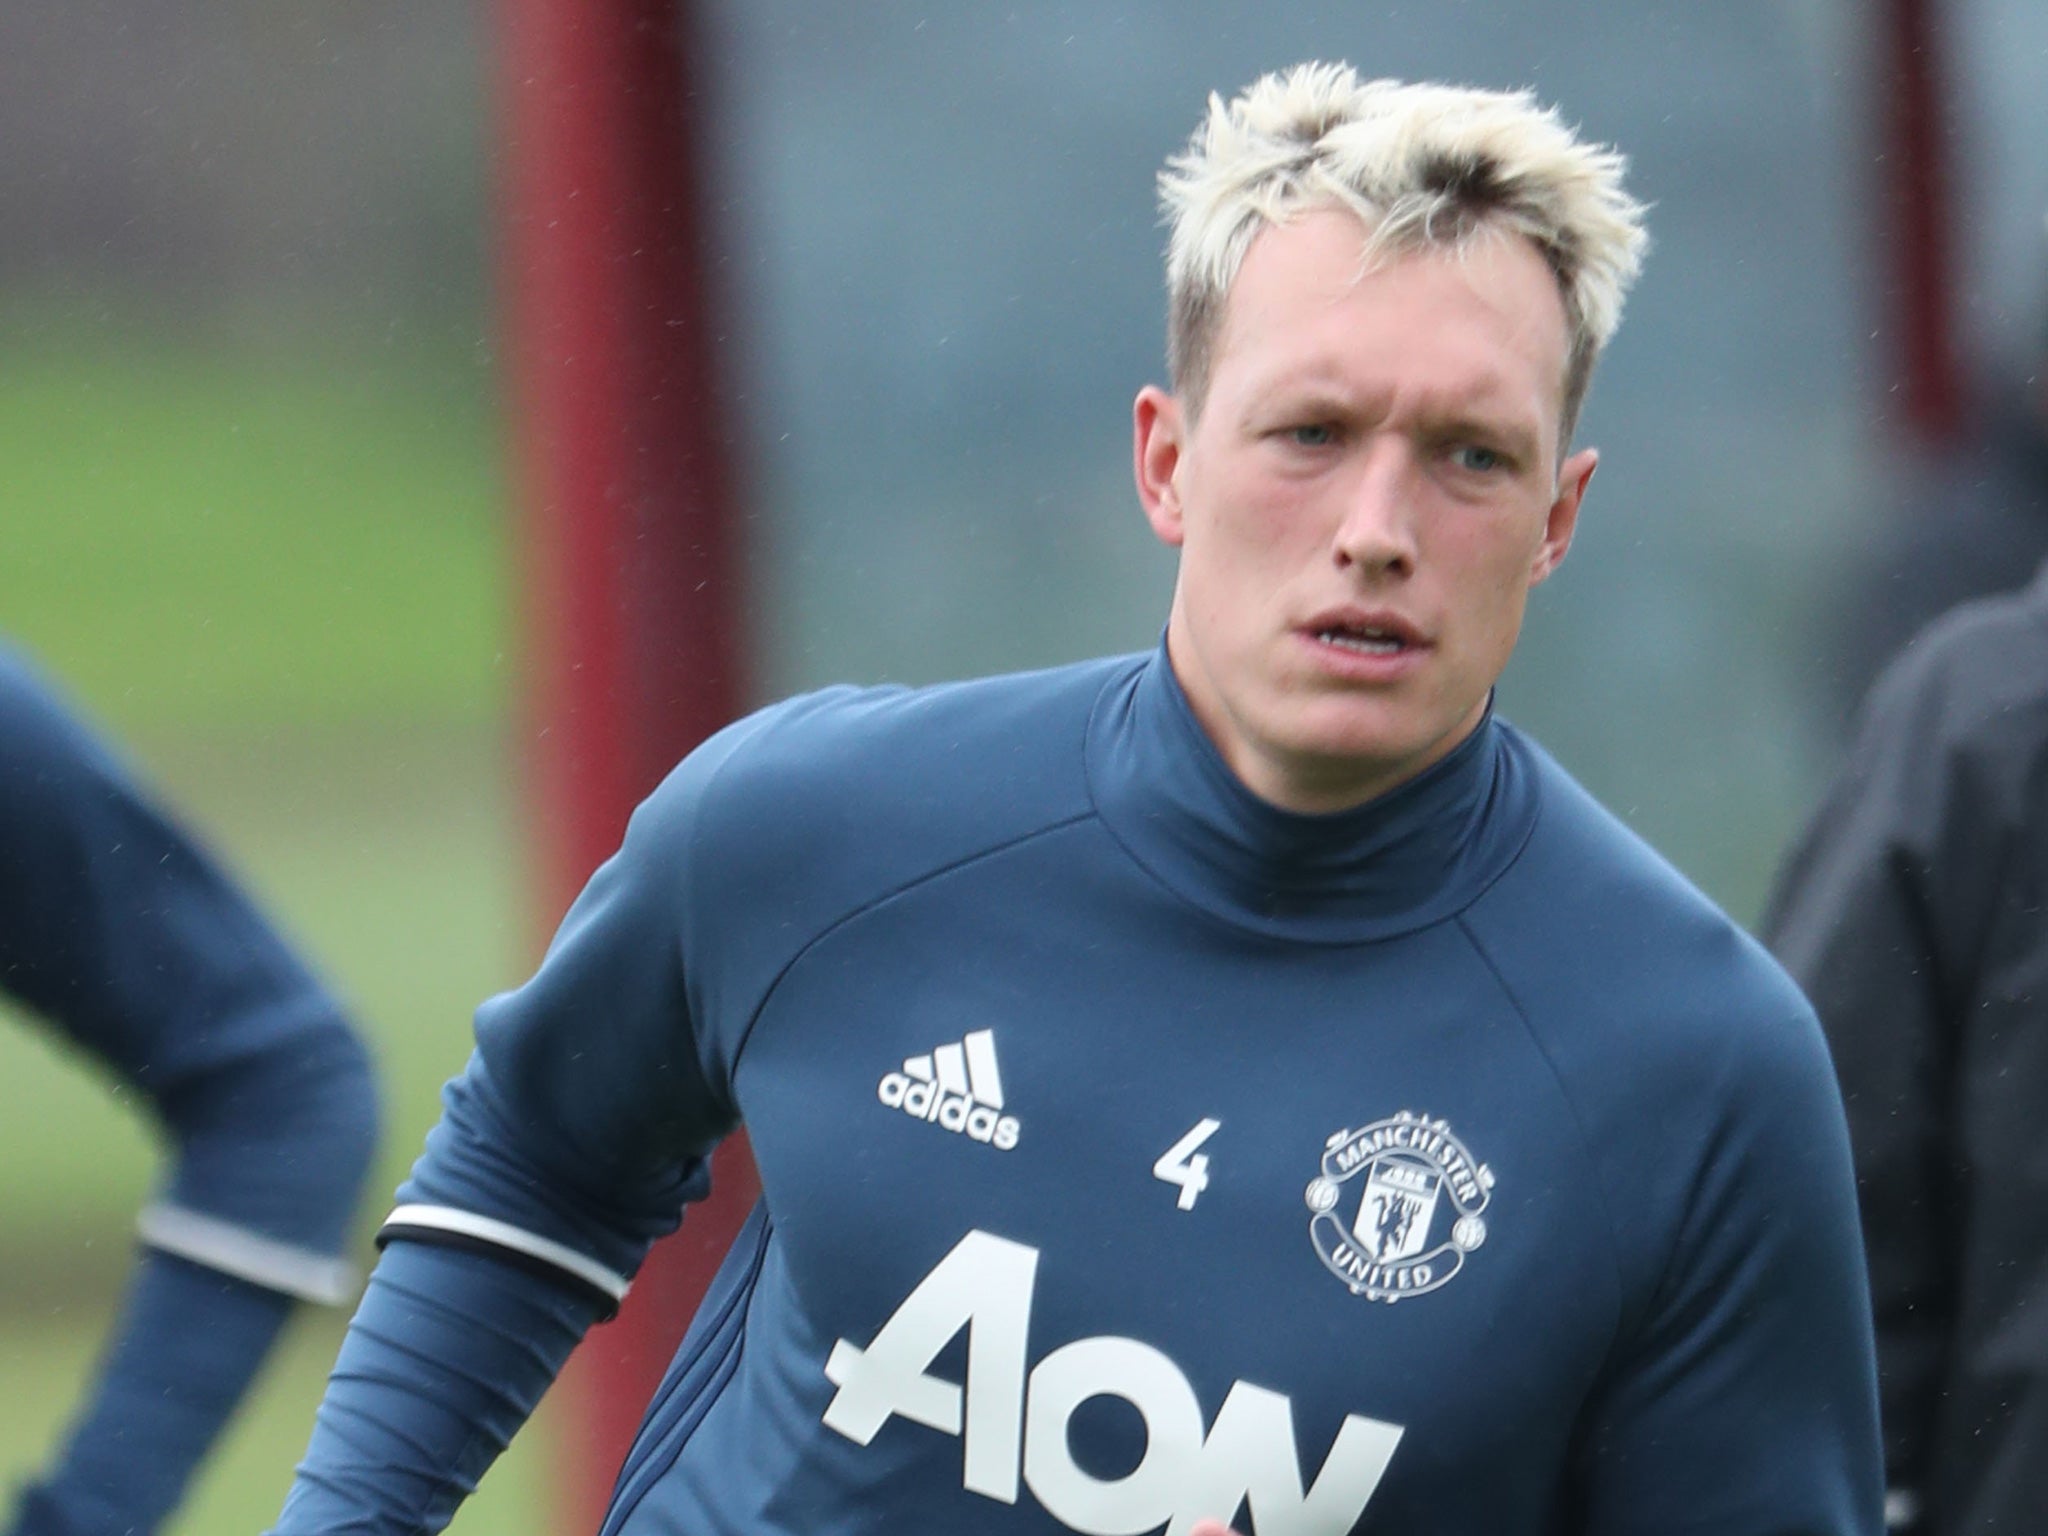 Jones has struggled for fitness at United this year